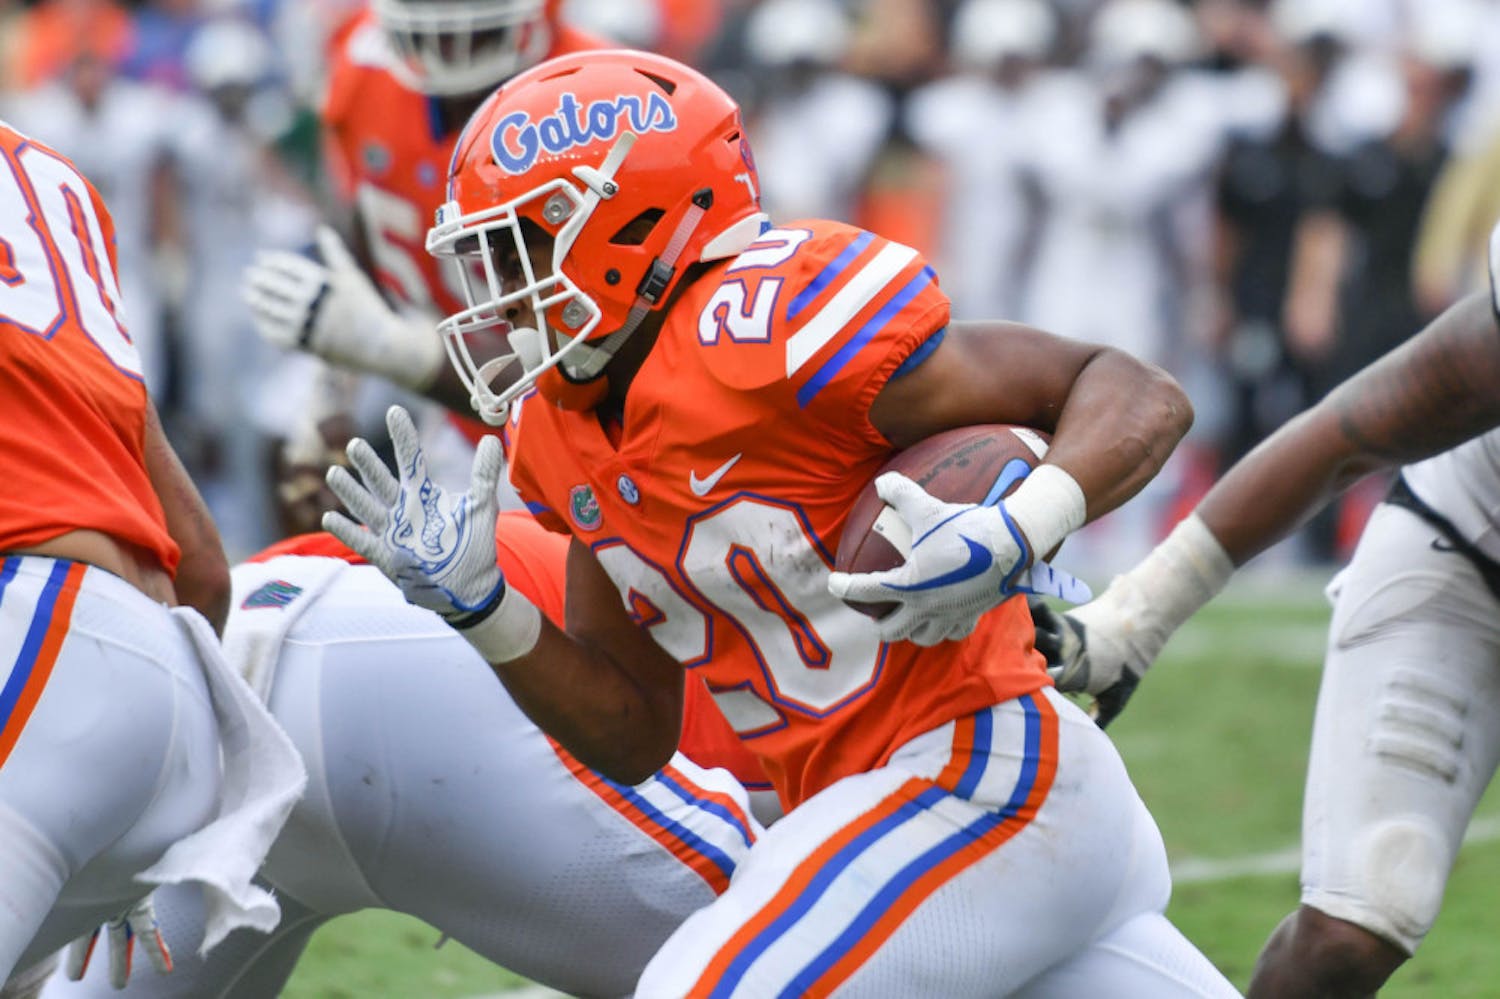 Malik Davis (pictured) and the Florida running backs are ready to take on the 2021 season by committee, running backs and special teams coach Greg Knox said Wednesday.